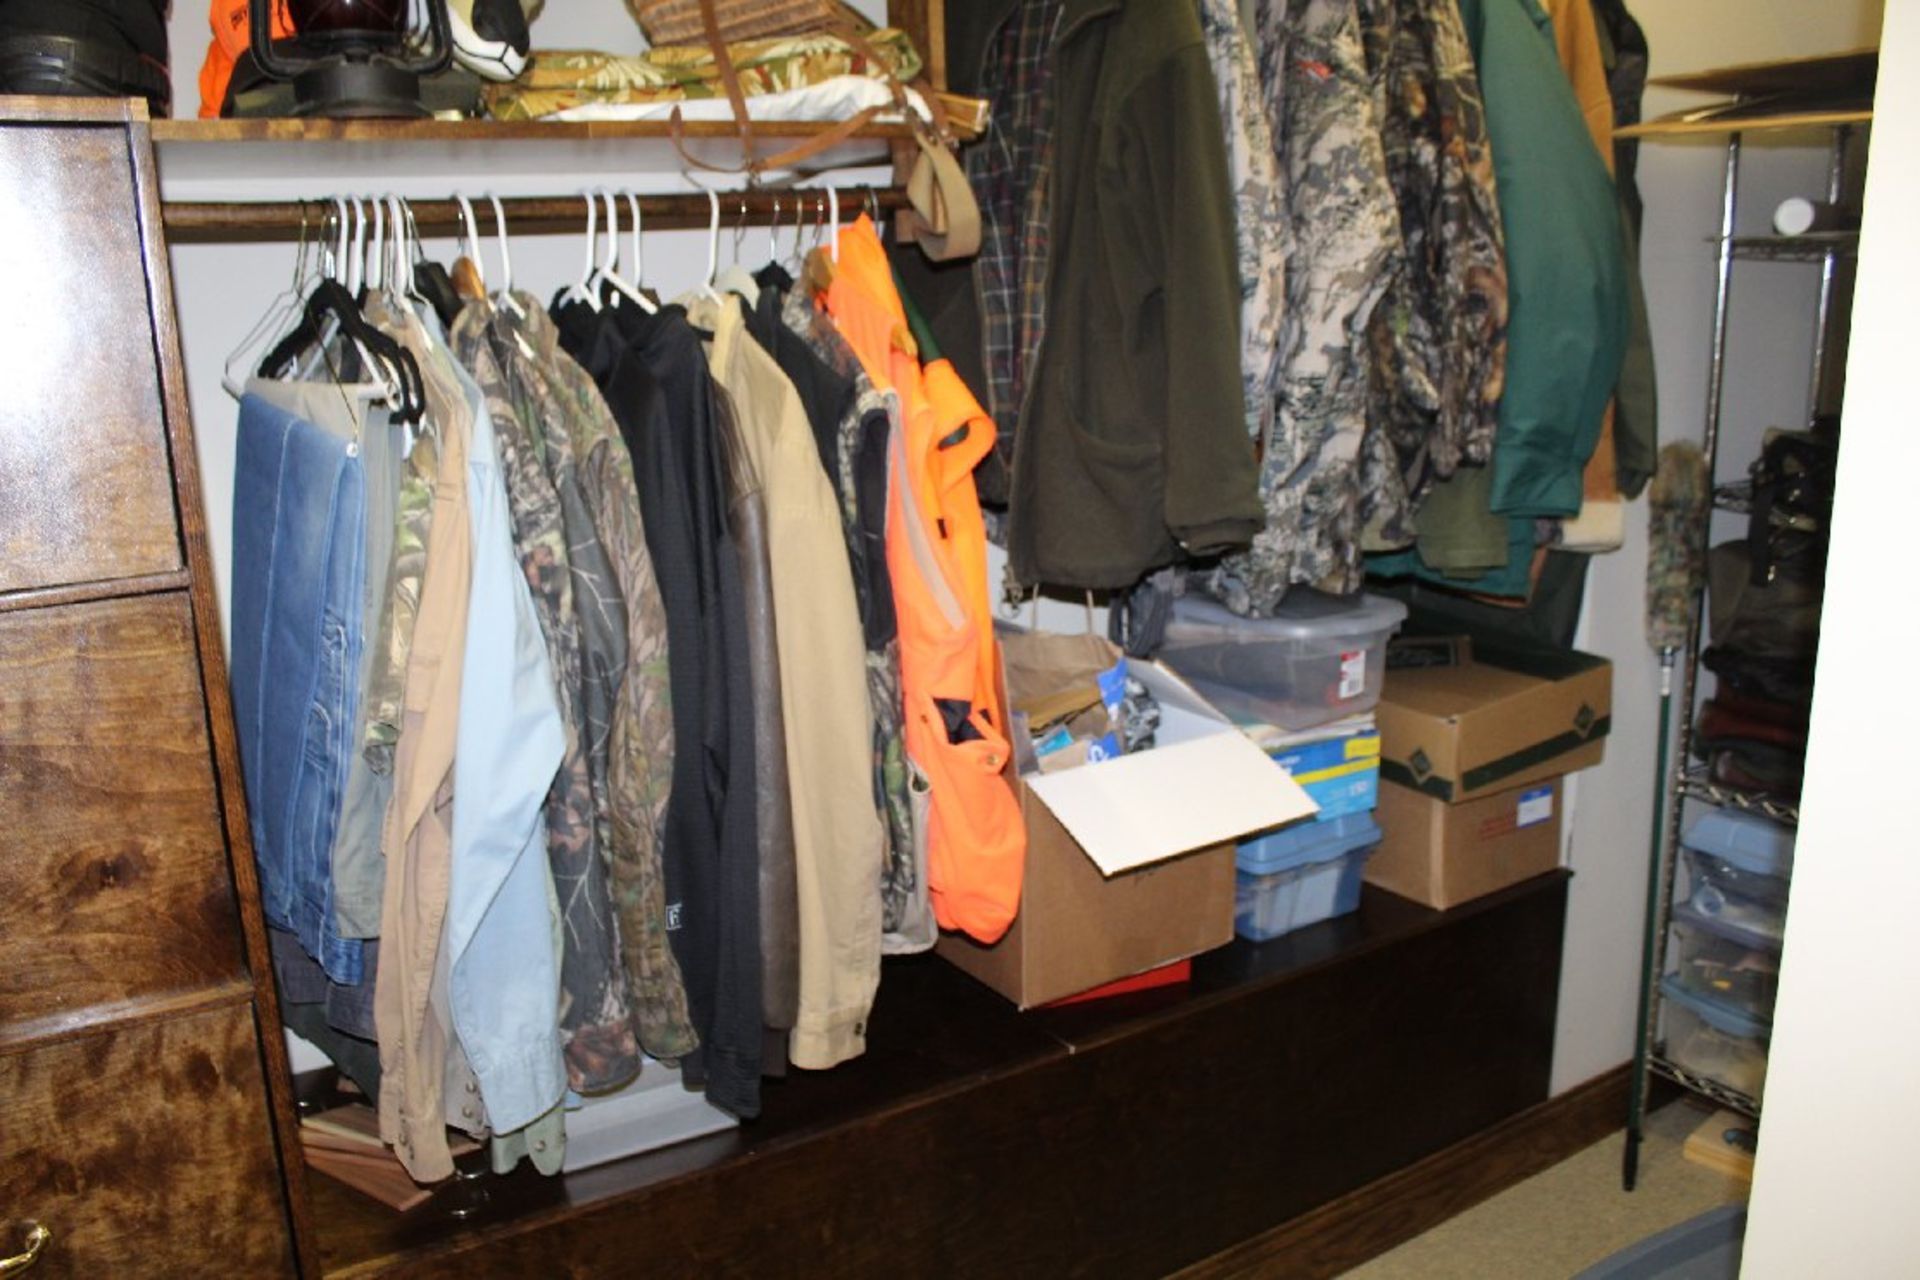 Contents of Closet, Assorted Hunting/Outdoor Clothing, Luggage, Office Supplies, Prints, Boots,